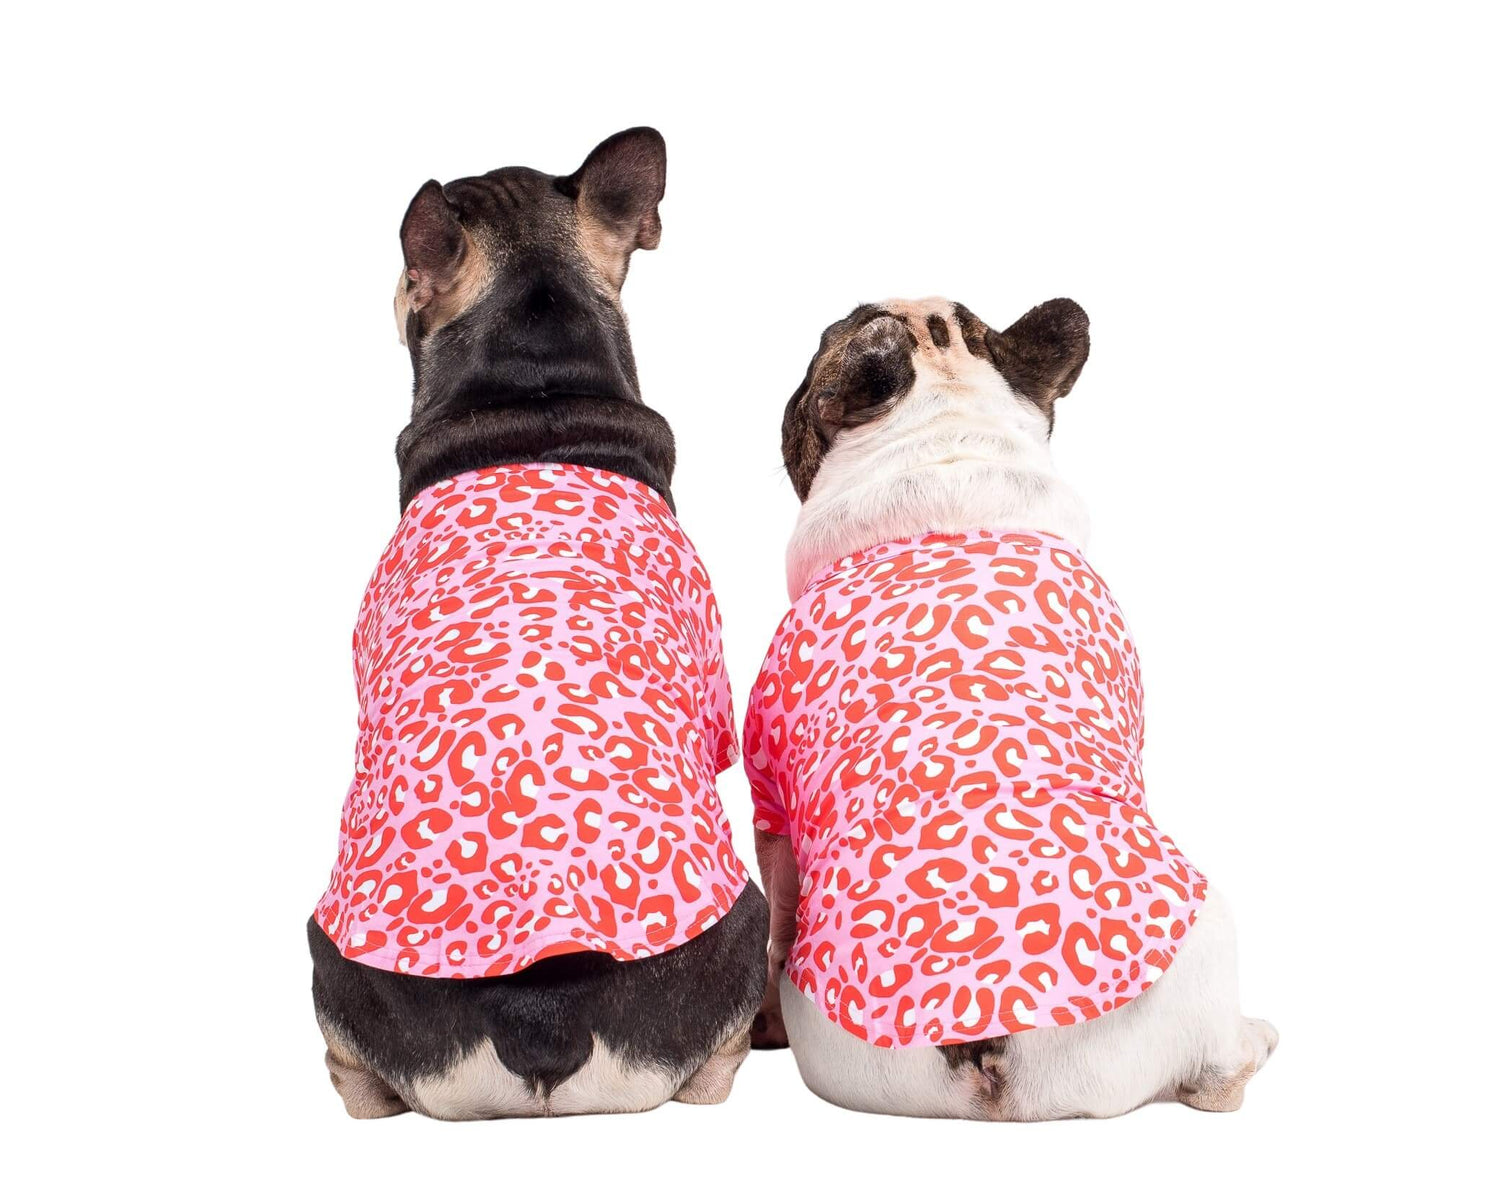 Two French bulldogs facing away while wearing Vibrant Hounds Fierve in Pink dog shirt. The shirt is a red and pink leopard print.